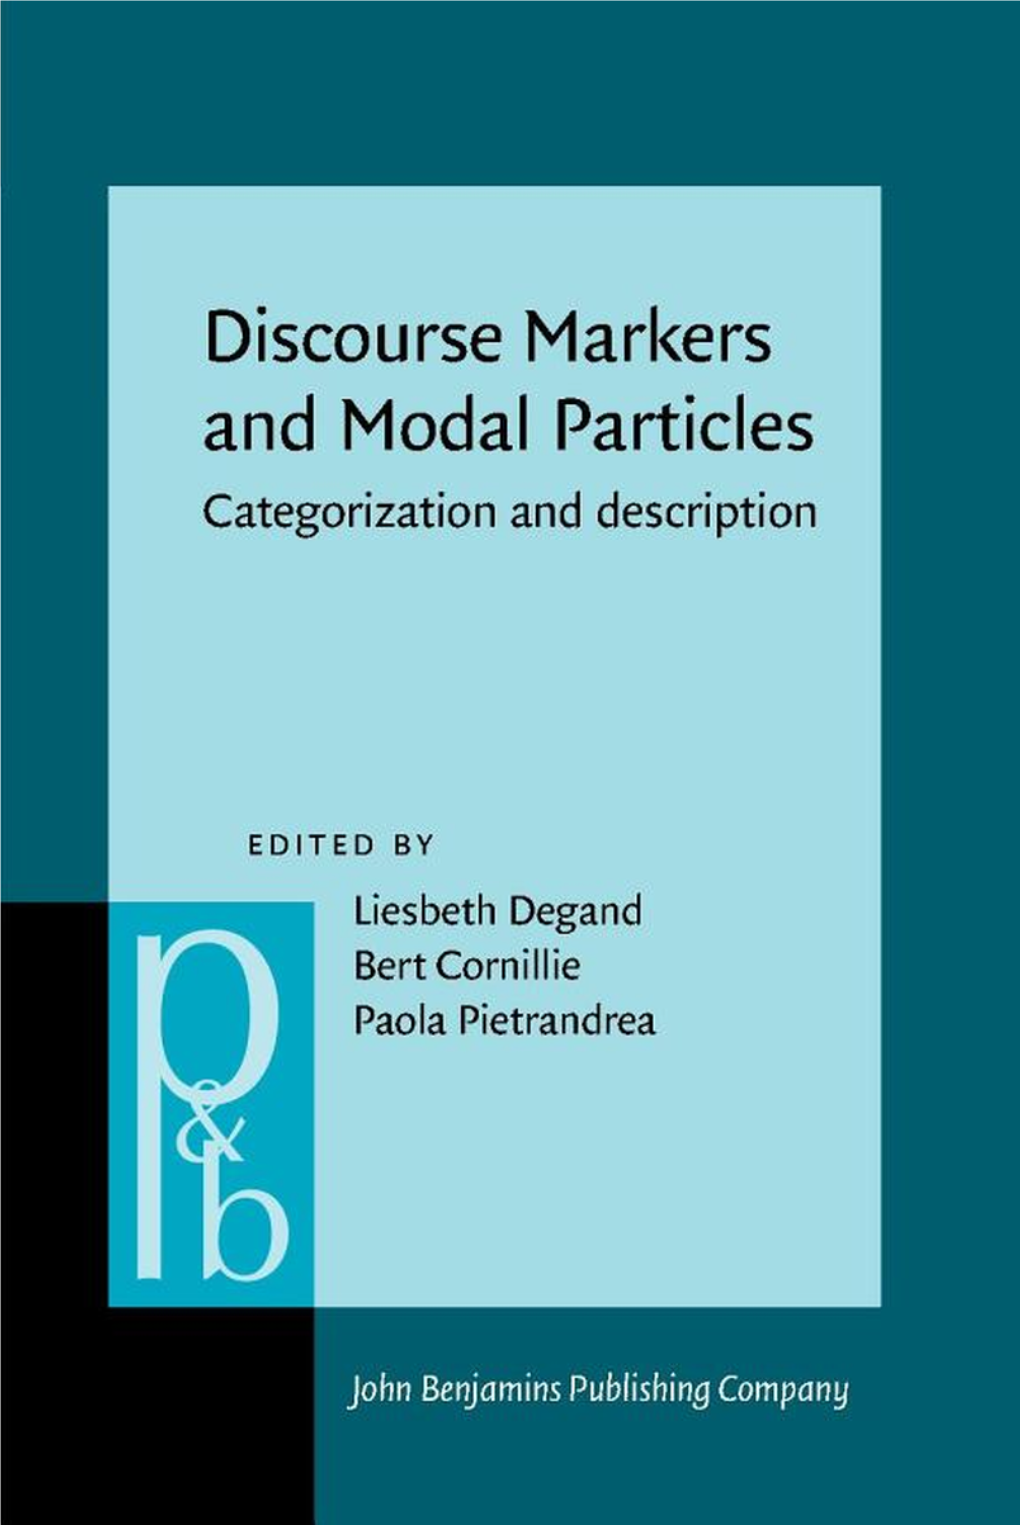 Discourse Markers and Modal Particles